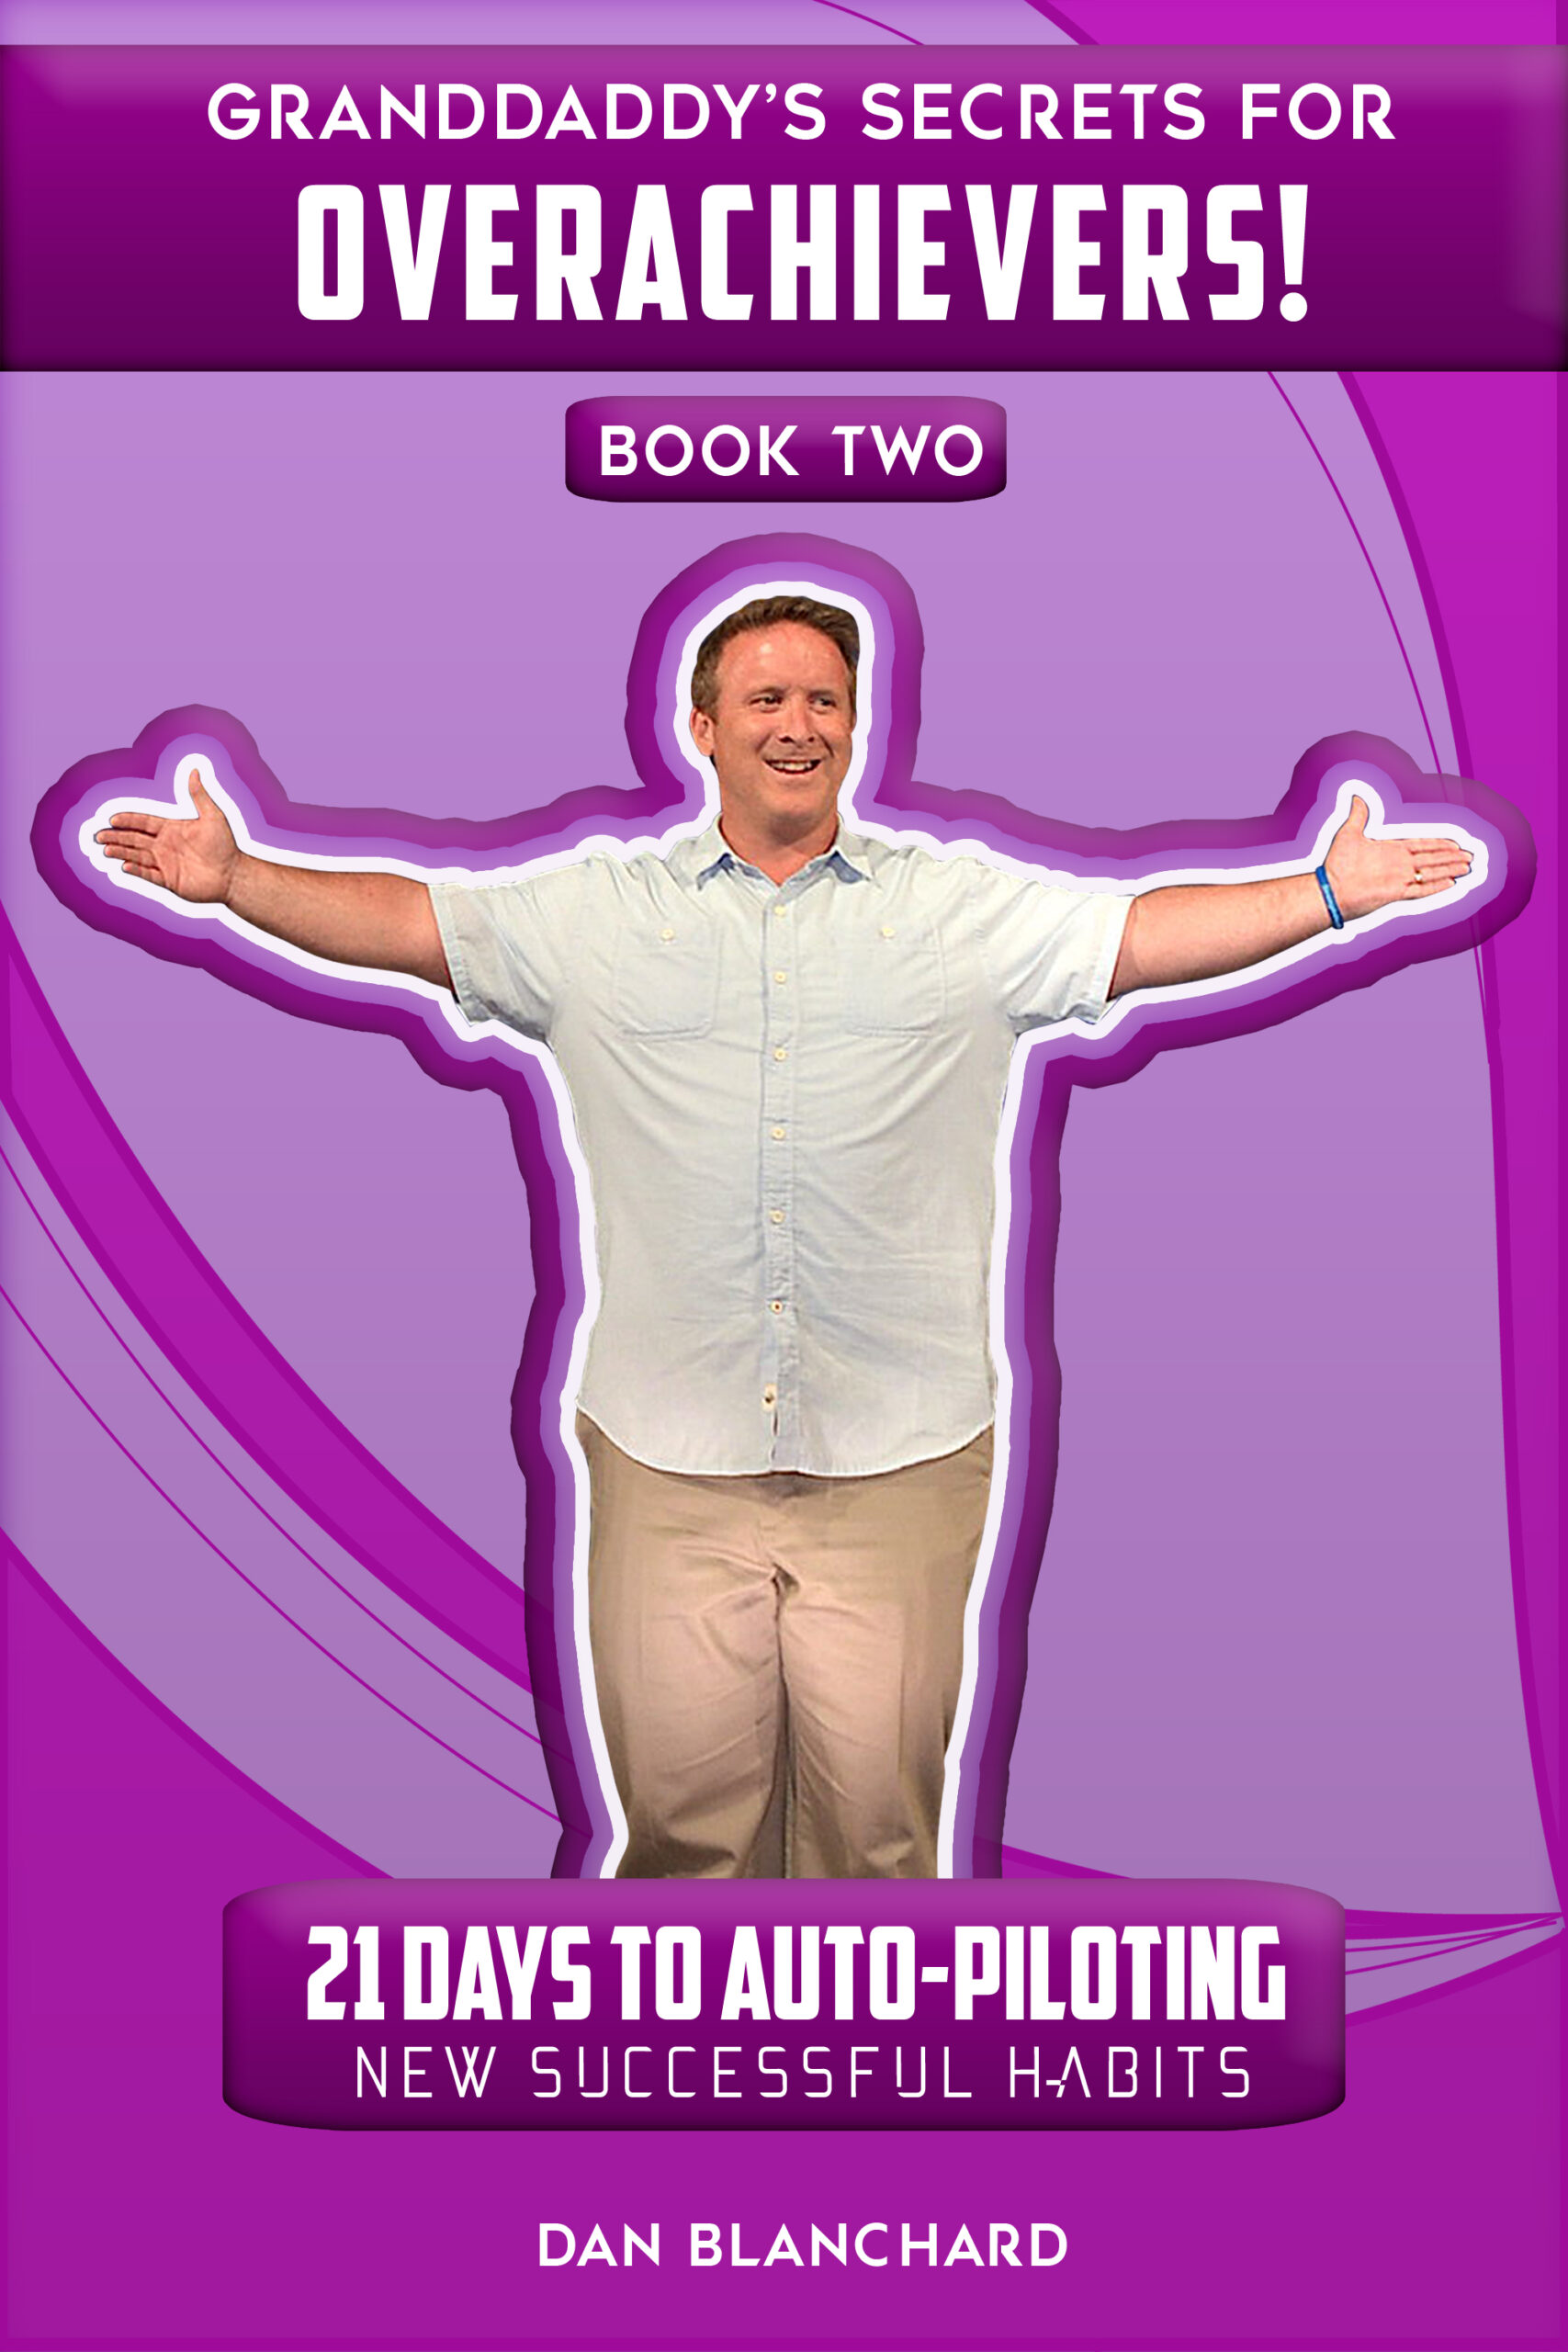 FREE: GRANDDADDY’S SECRETS FOR OVERACHIEVERS! BOOK TWO: 21 Days to Auto-Piloting New Successful Habits by Dan Blanchard